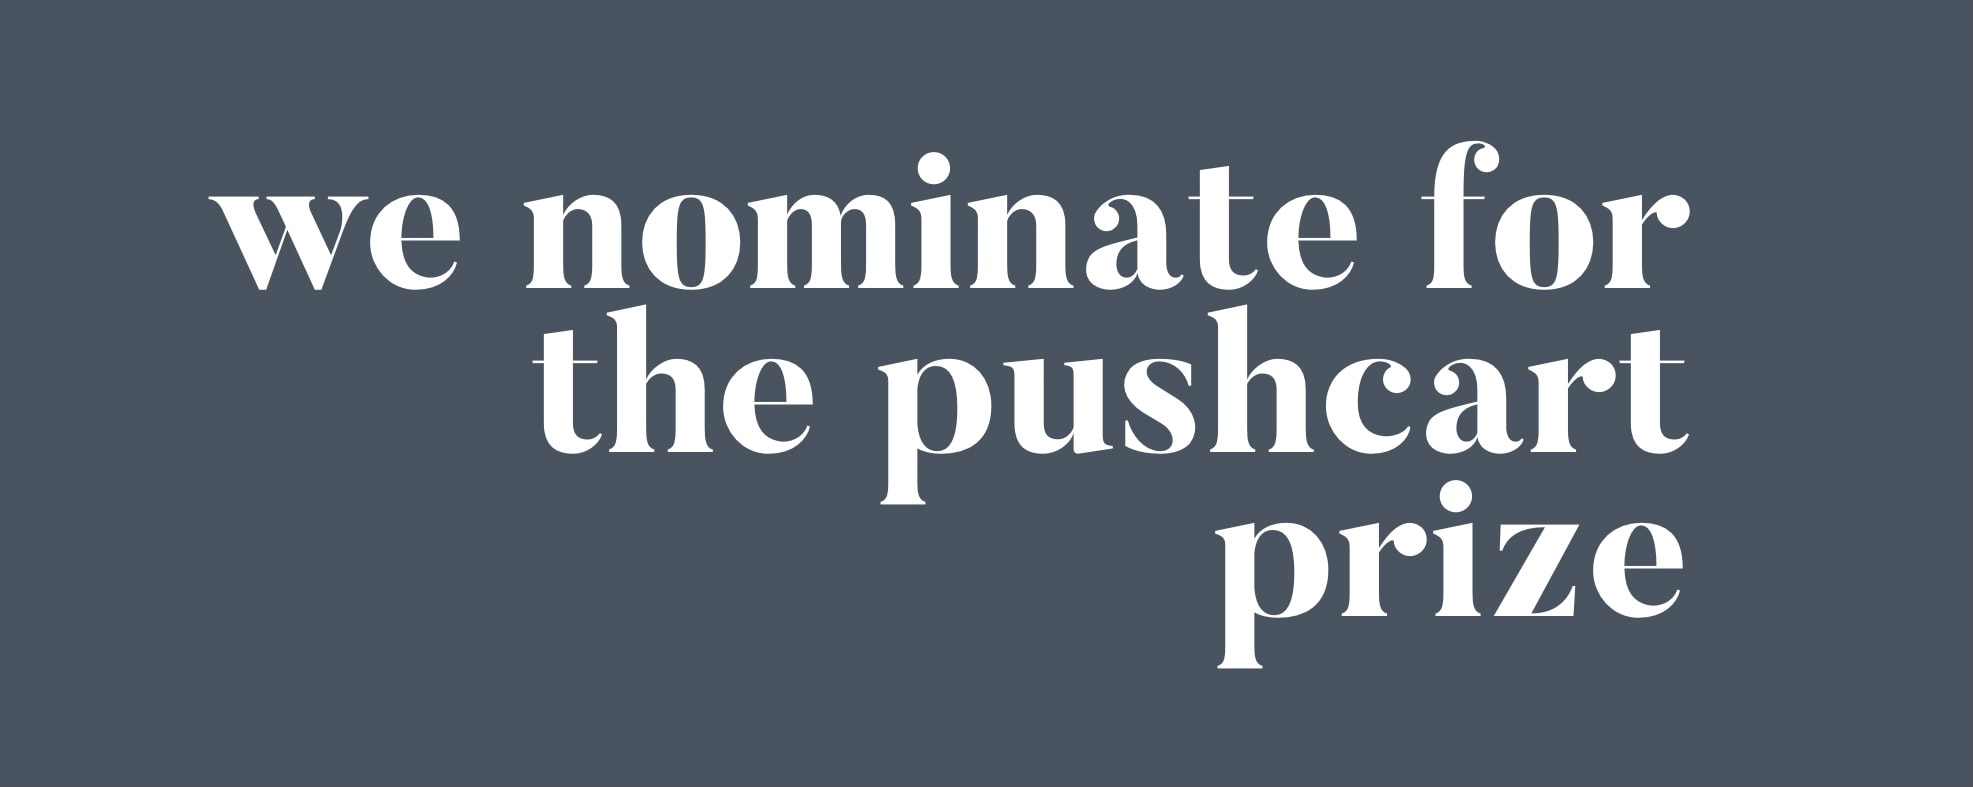 we nominate for the pushcart prize